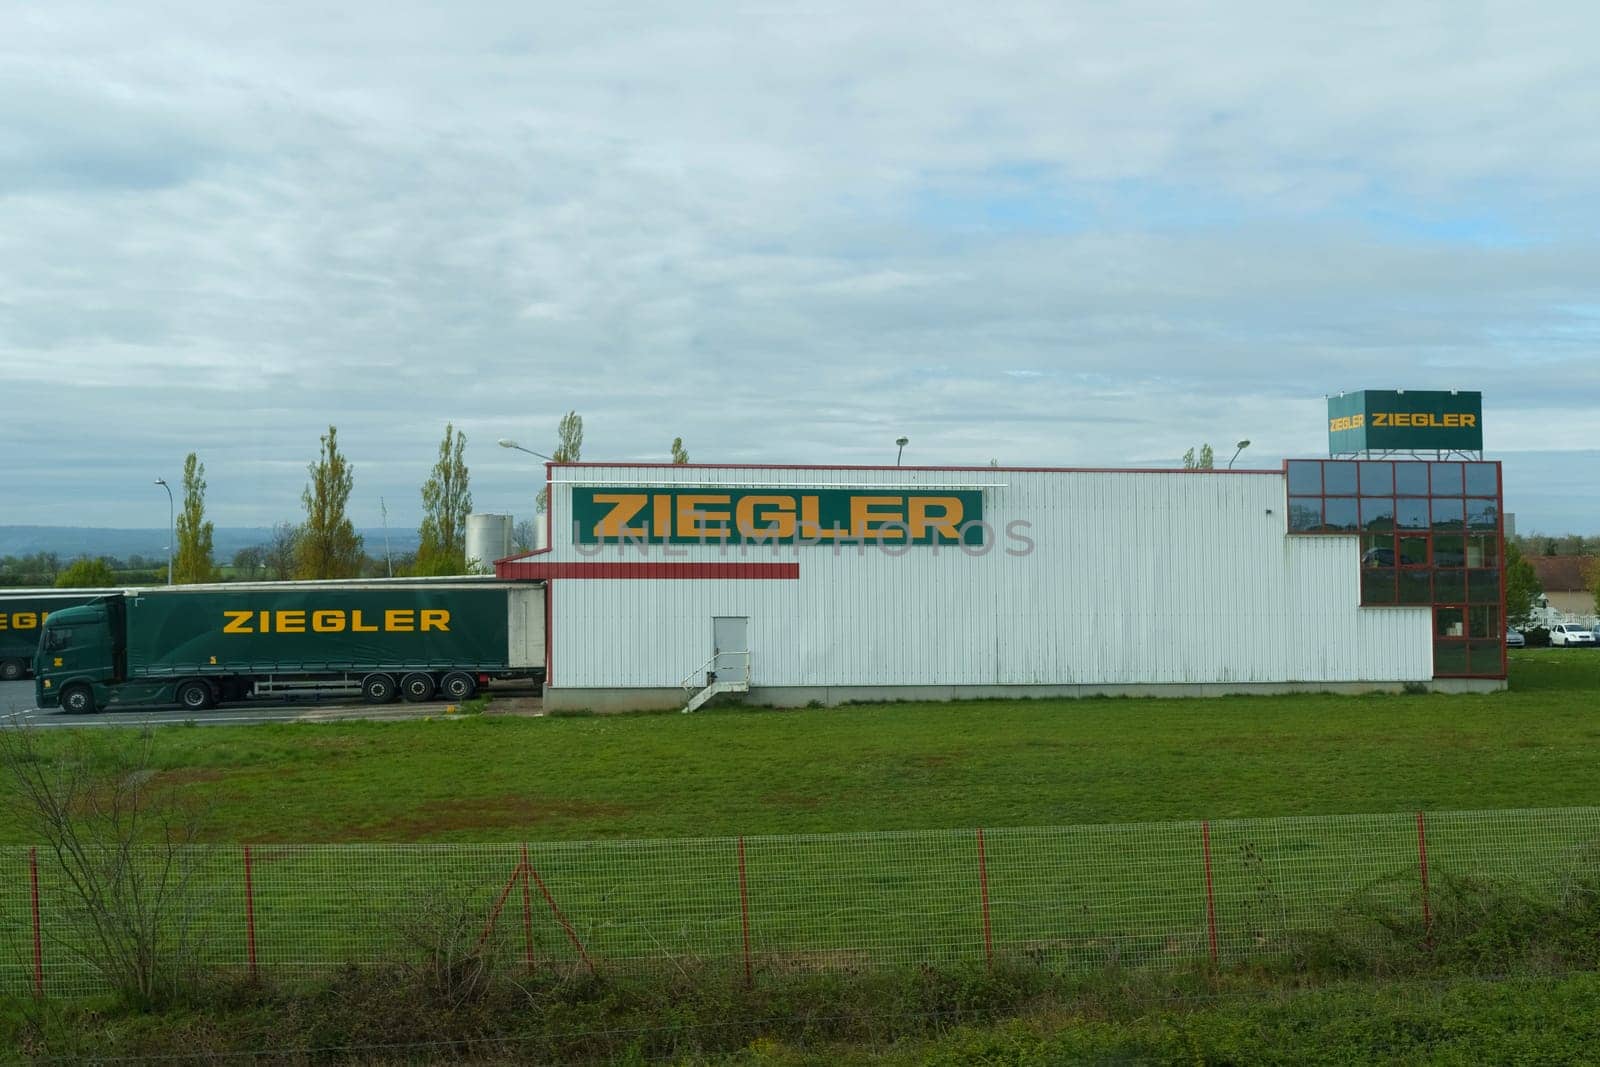 Clermont-Ferrand, France - April 26, 2023: A Ziegler logistics truck is parked outside a warehouse labeled with the Ziegler logo, with green fields and a cloudy sky in the backdrop.